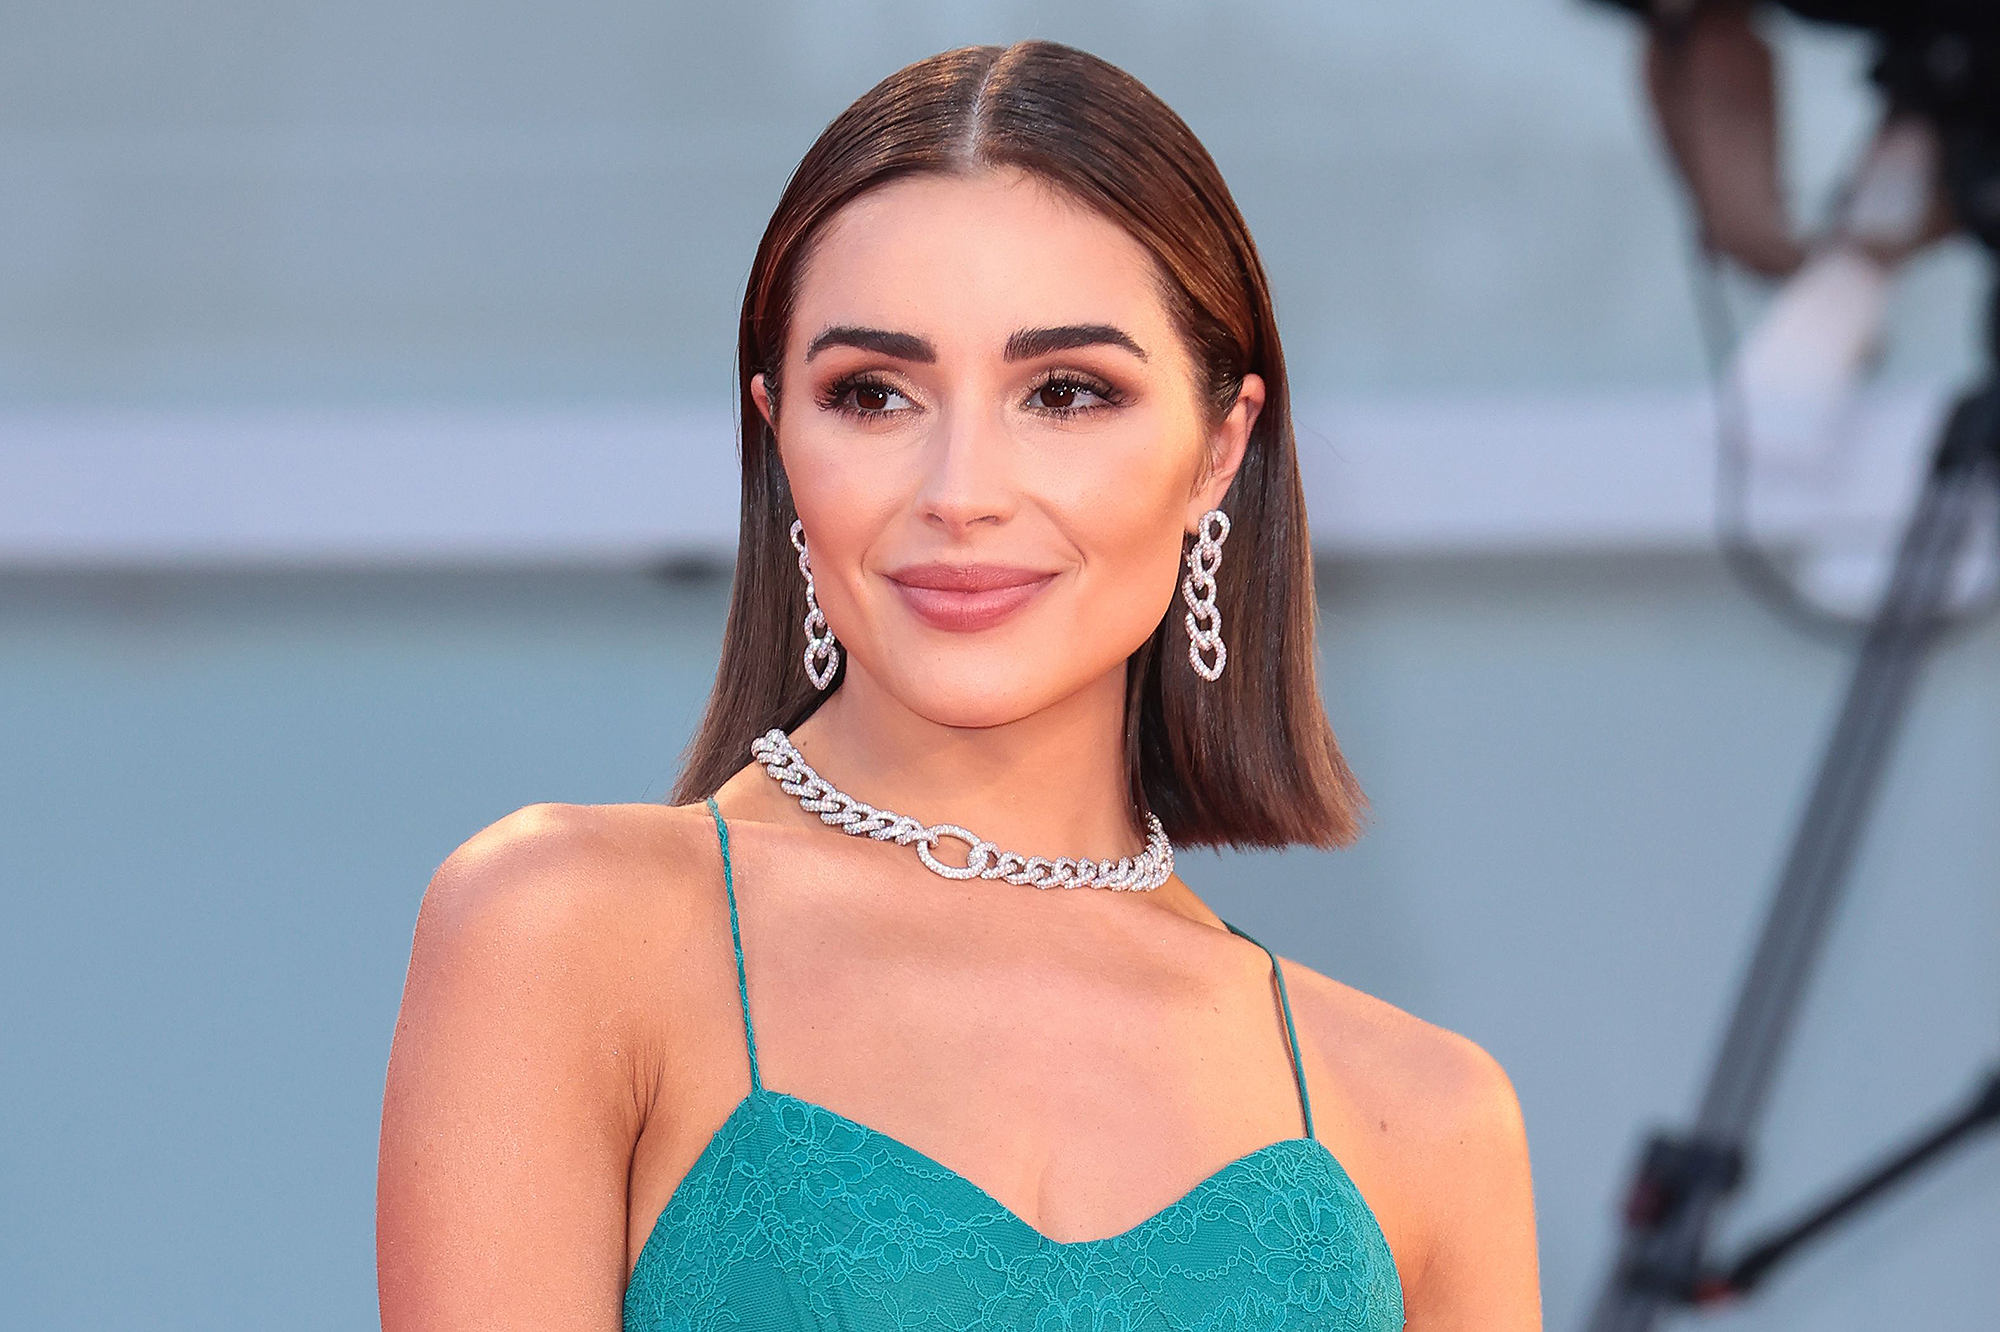 Olivia Culpo Uses This Chanel Bronzing Cream for a Natural Glow